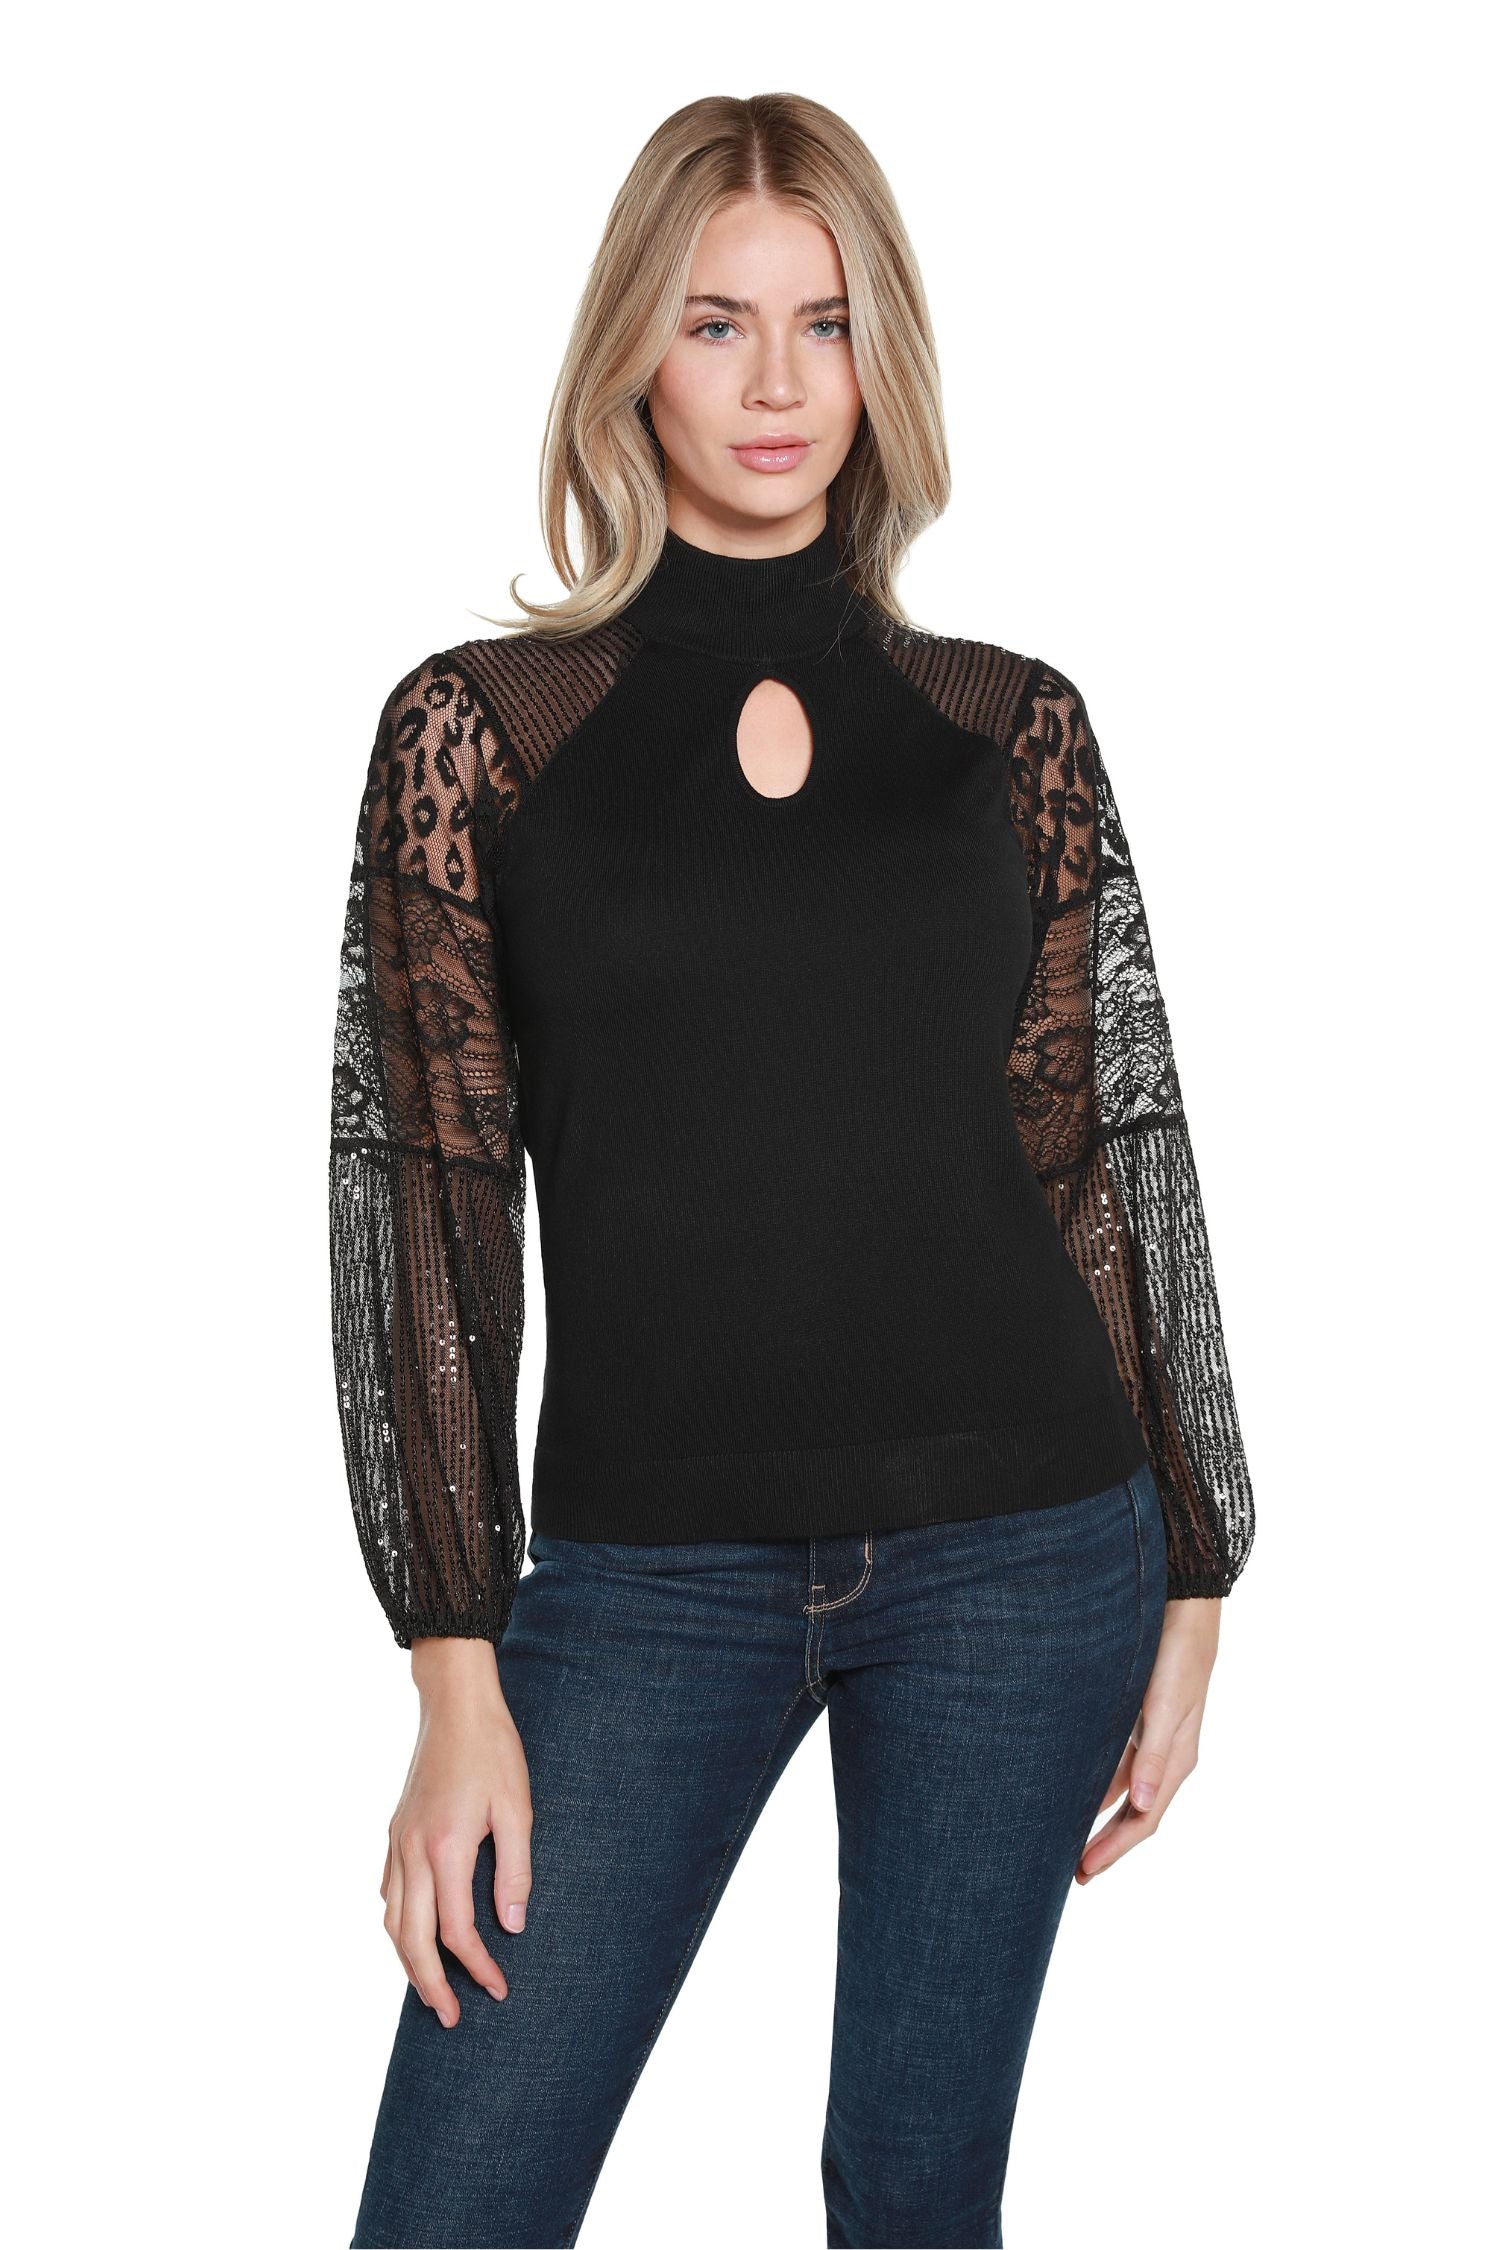 Women’s Long Sleeve Black Sexy Sweater with Modern Lace and Sequin Sleeves